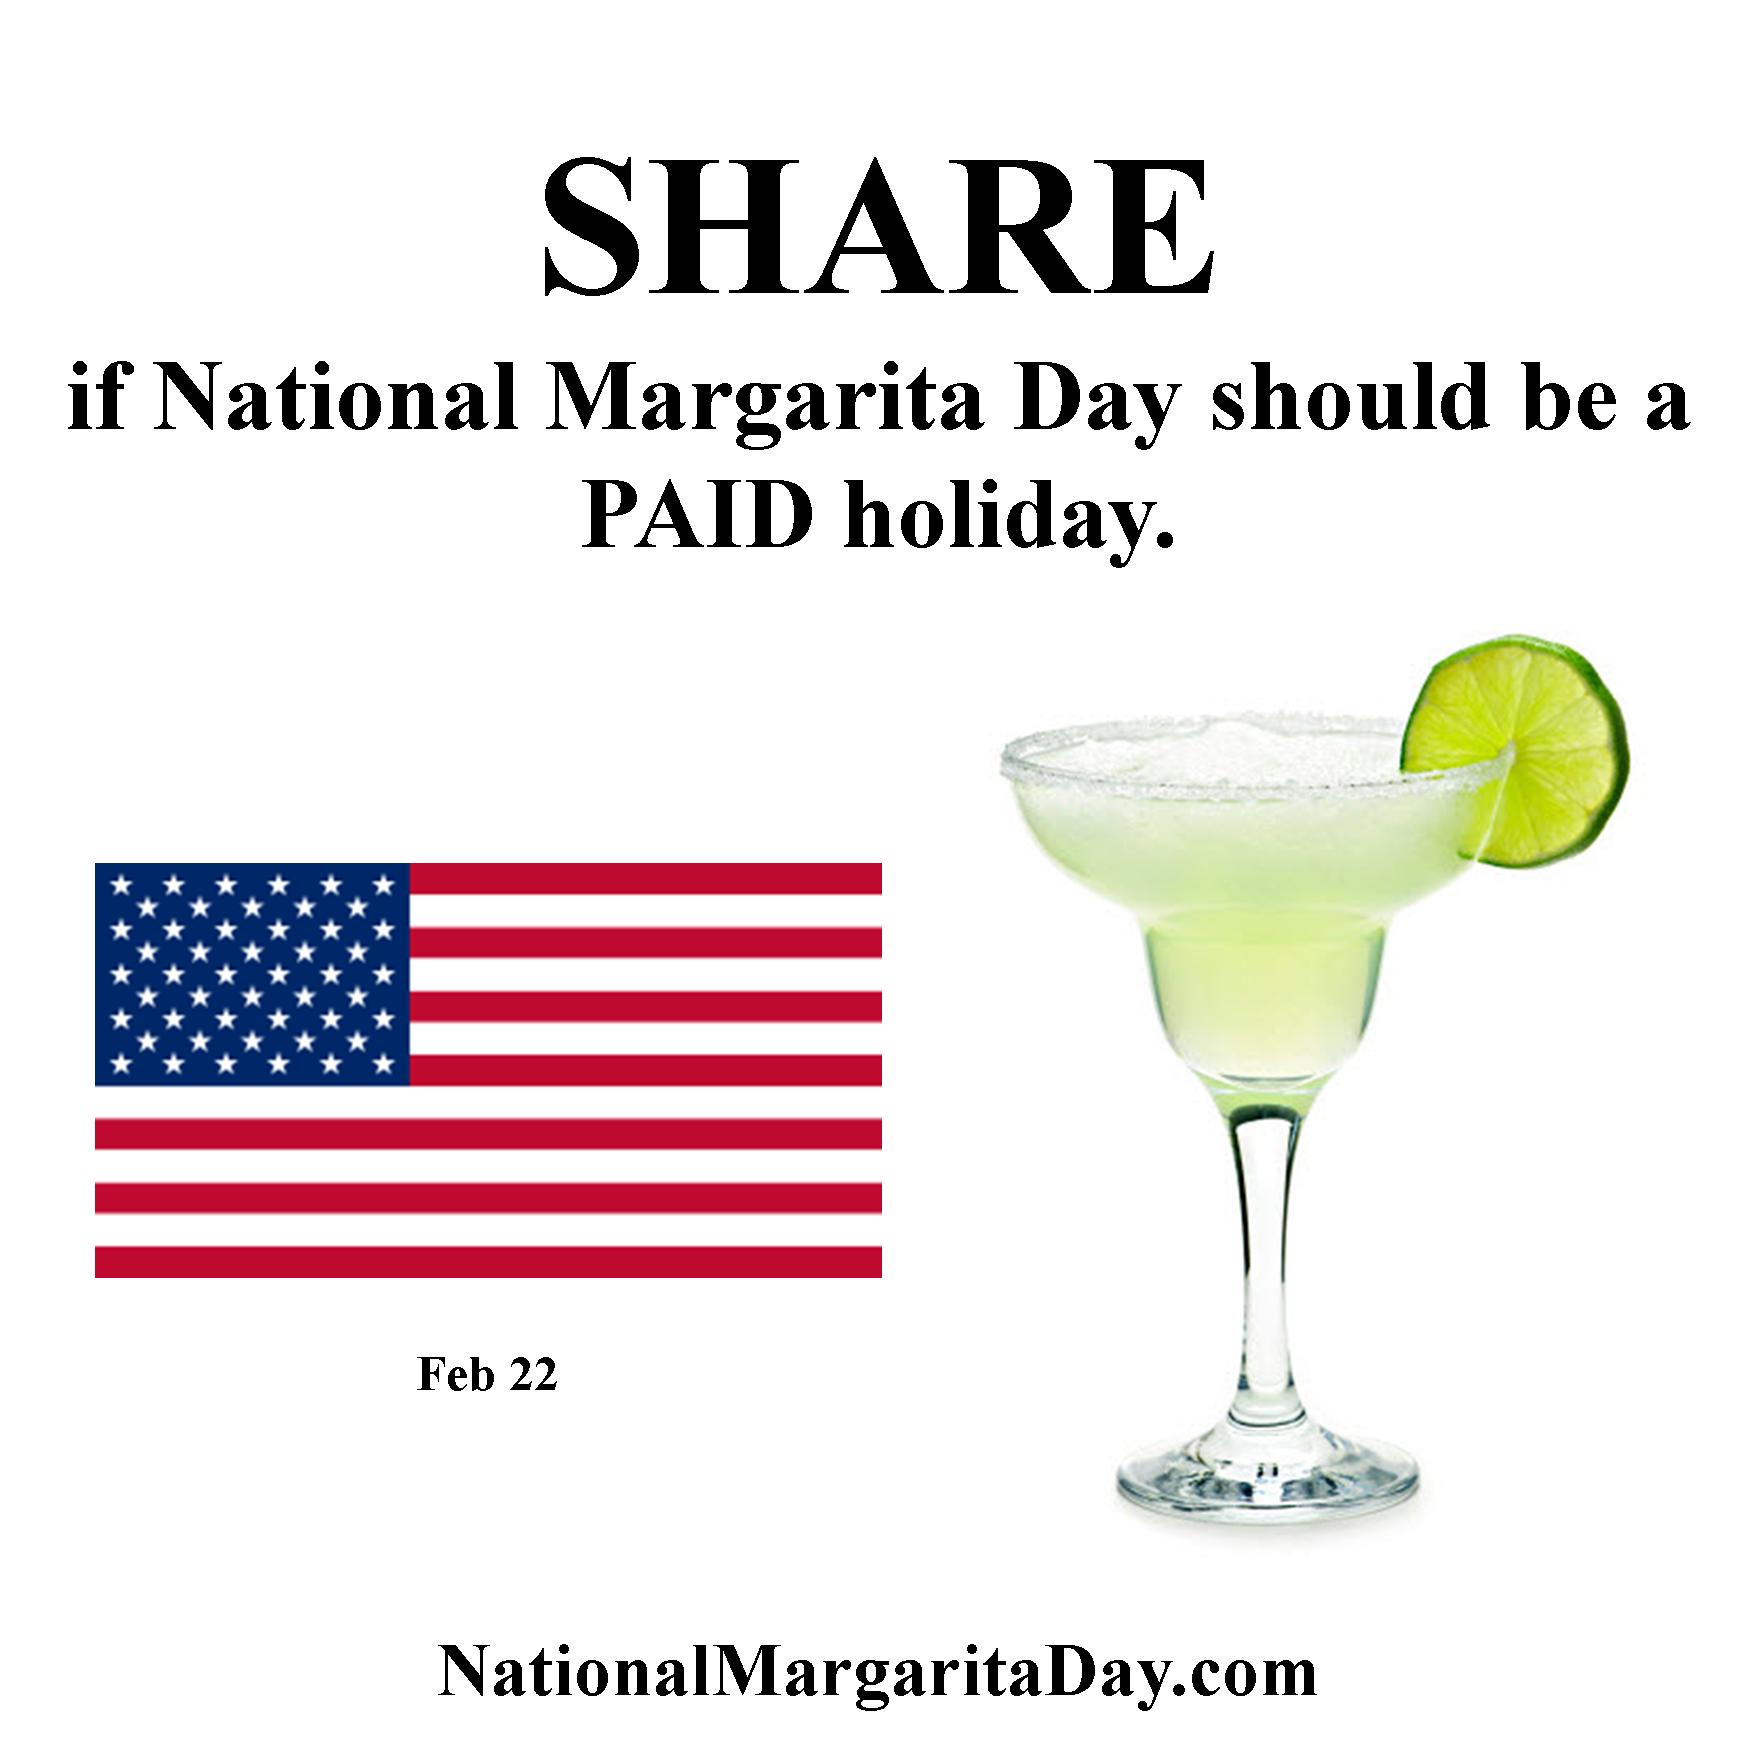 National Margarita Day A Paid Holiday? 